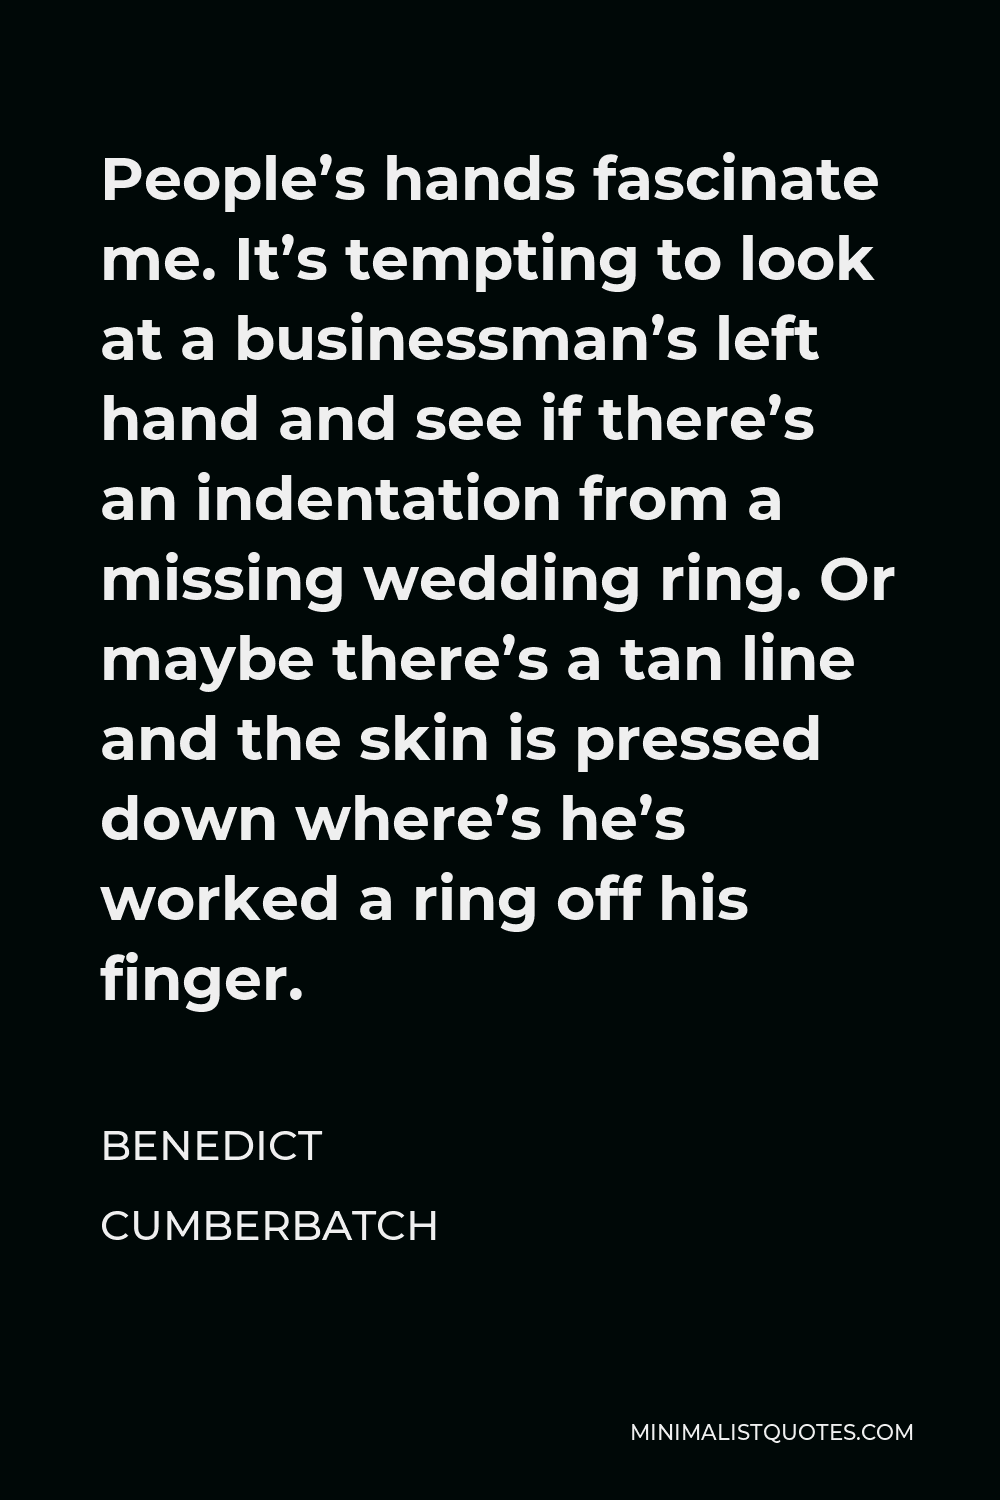 Benedict Cumberbatch Quote - People’s hands fascinate me. It’s tempting to look at a businessman’s left hand and see if there’s an indentation from a missing wedding ring. Or maybe there’s a tan line and the skin is pressed down where’s he’s worked a ring off his finger.